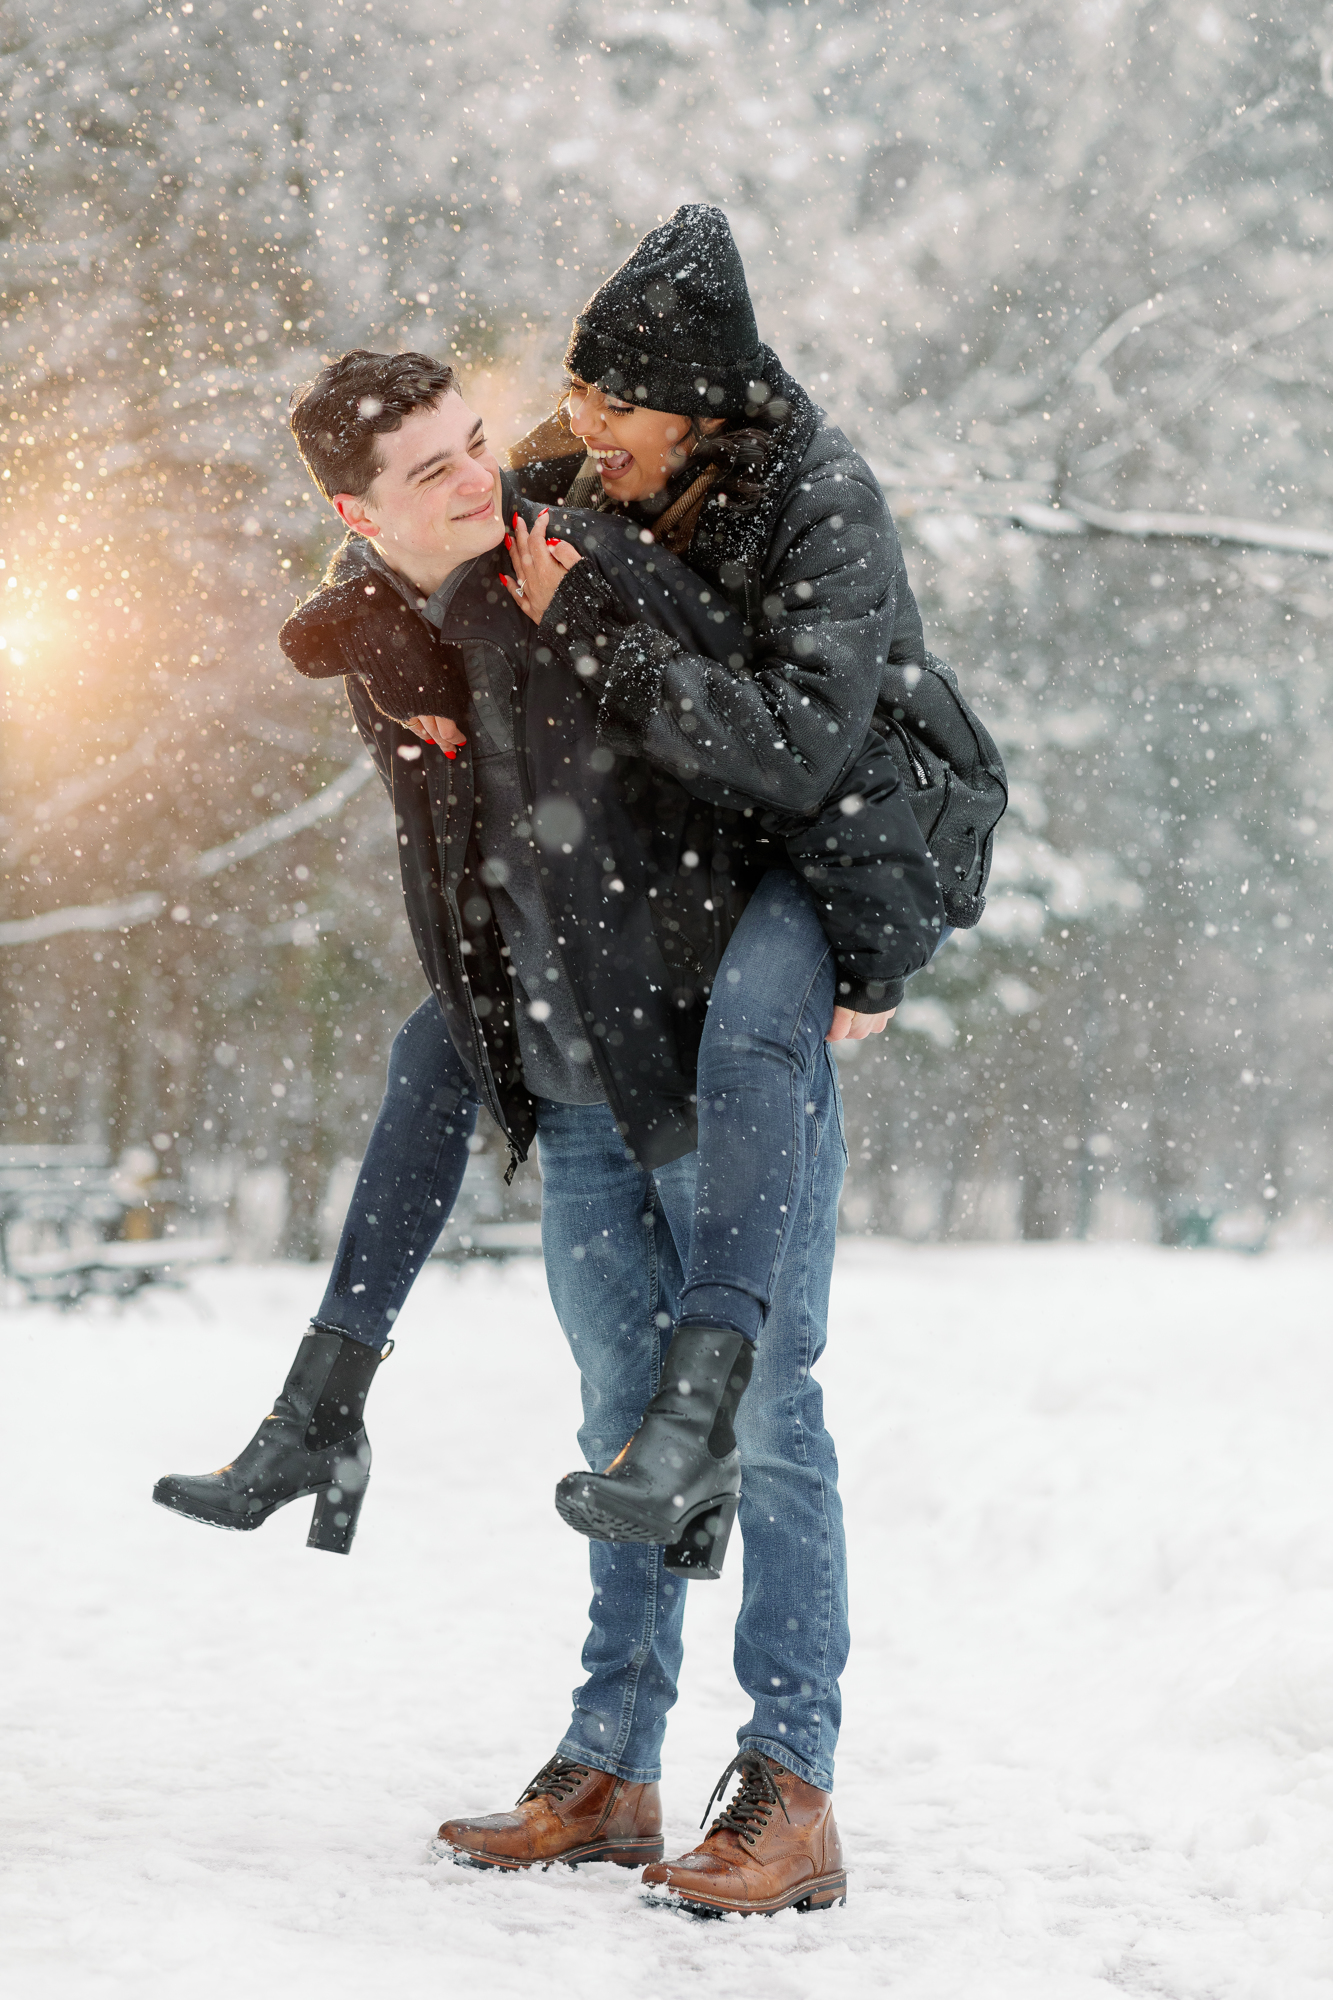 Dazzling Winter Engagement Photos in Snowy Prospect Park